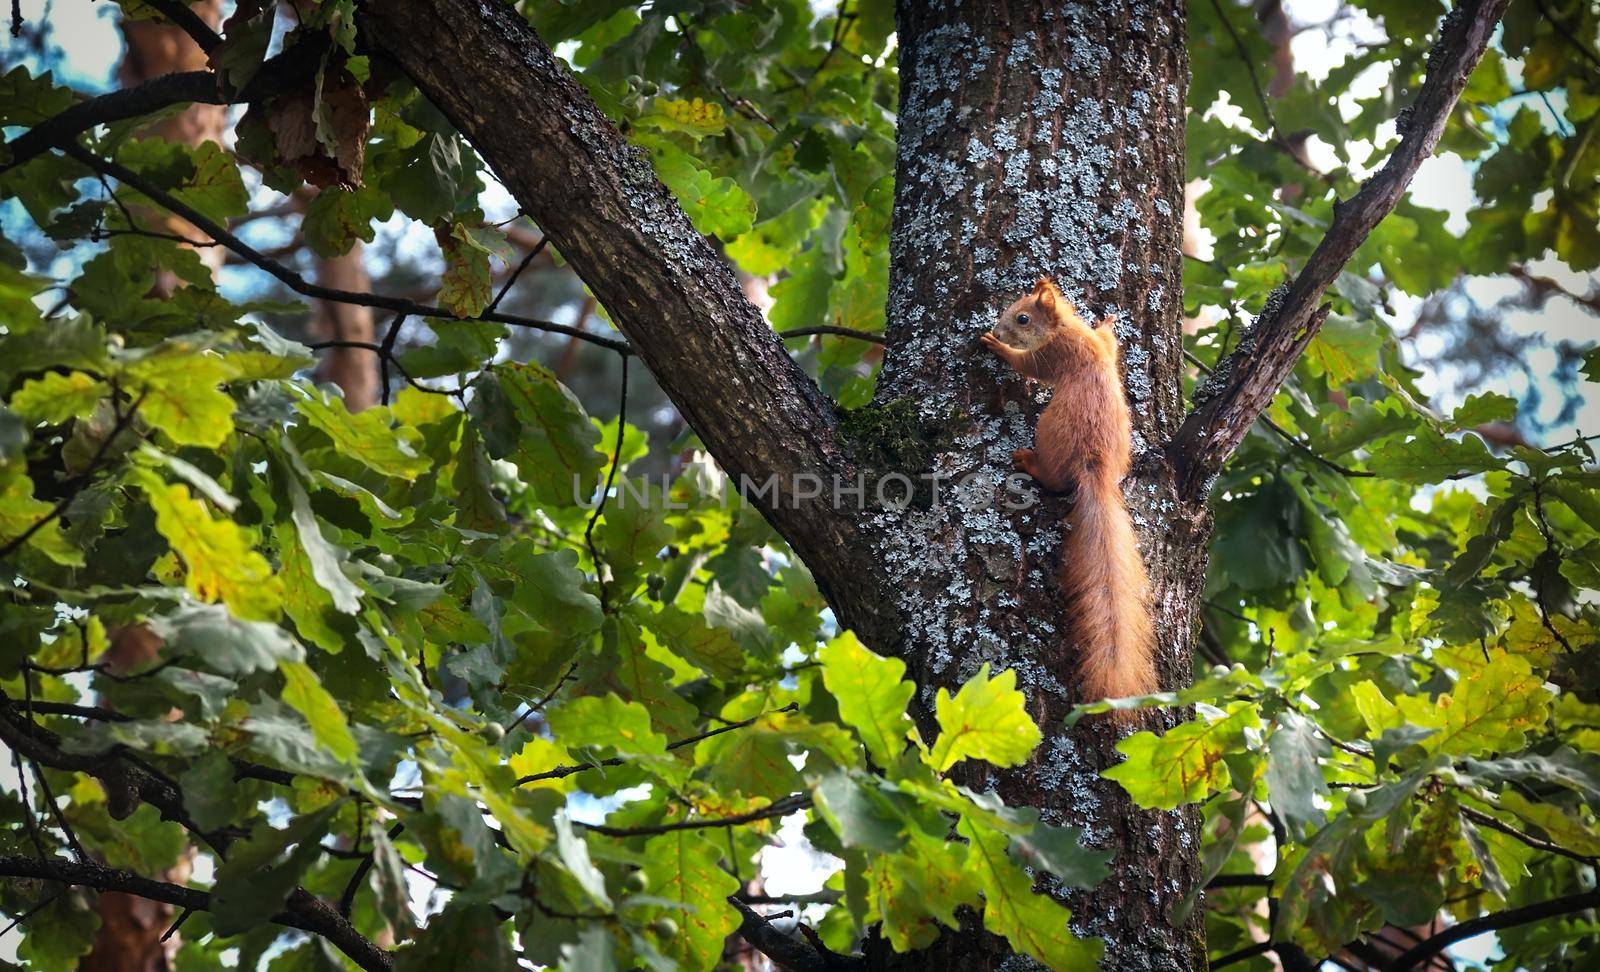 On the trunk of an oak sits a red squirrel with a long tail